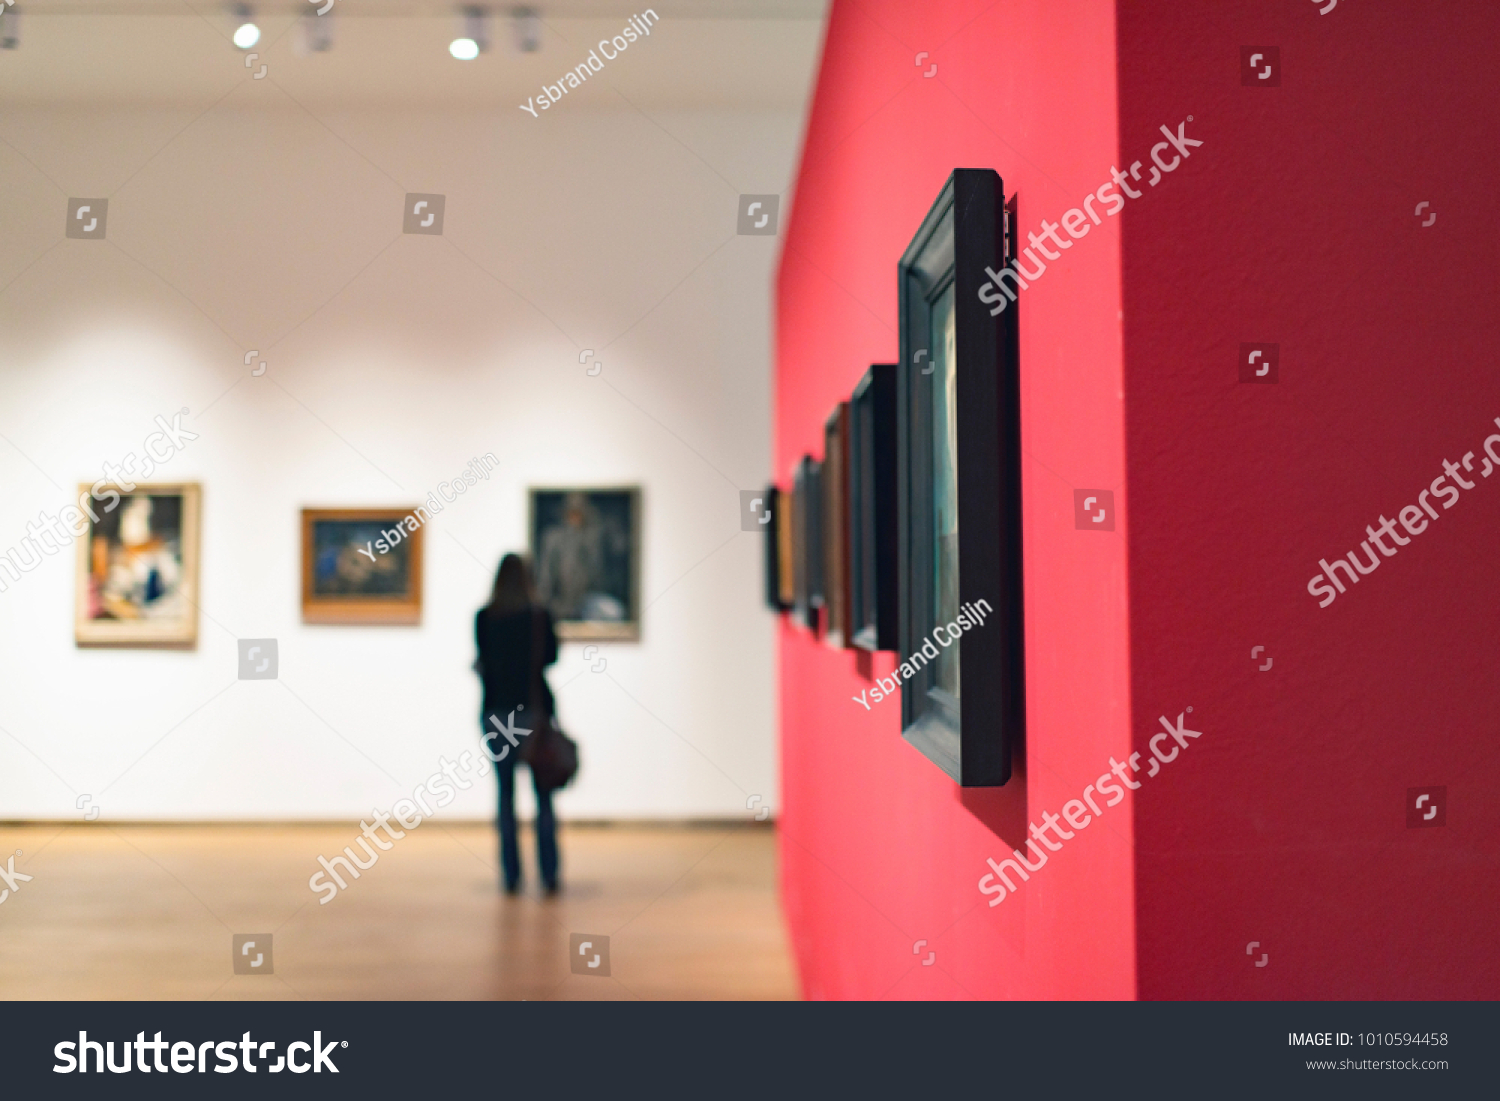 Room in museum with artworks and visitor. #1010594458